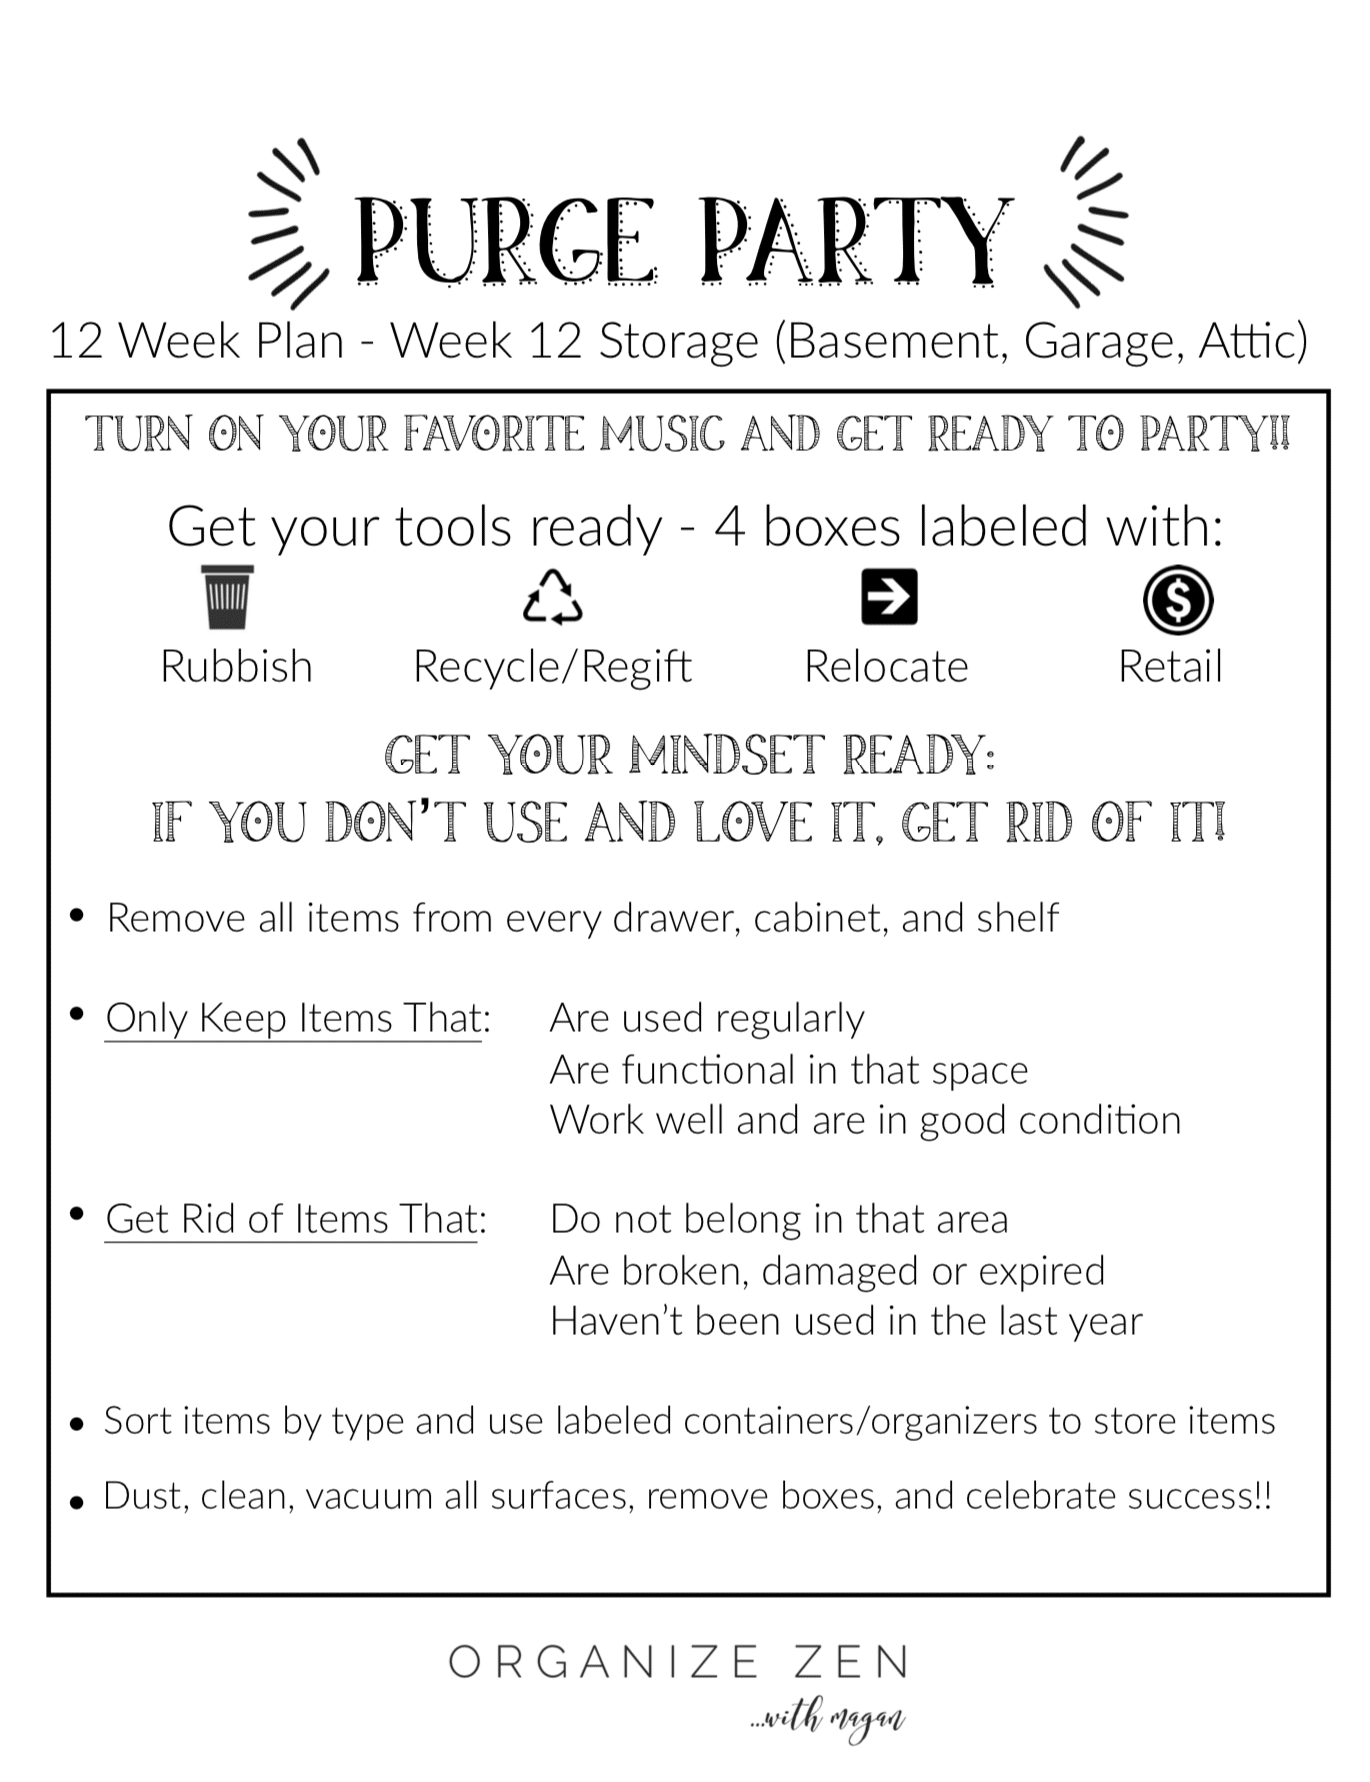 Purge Party printable